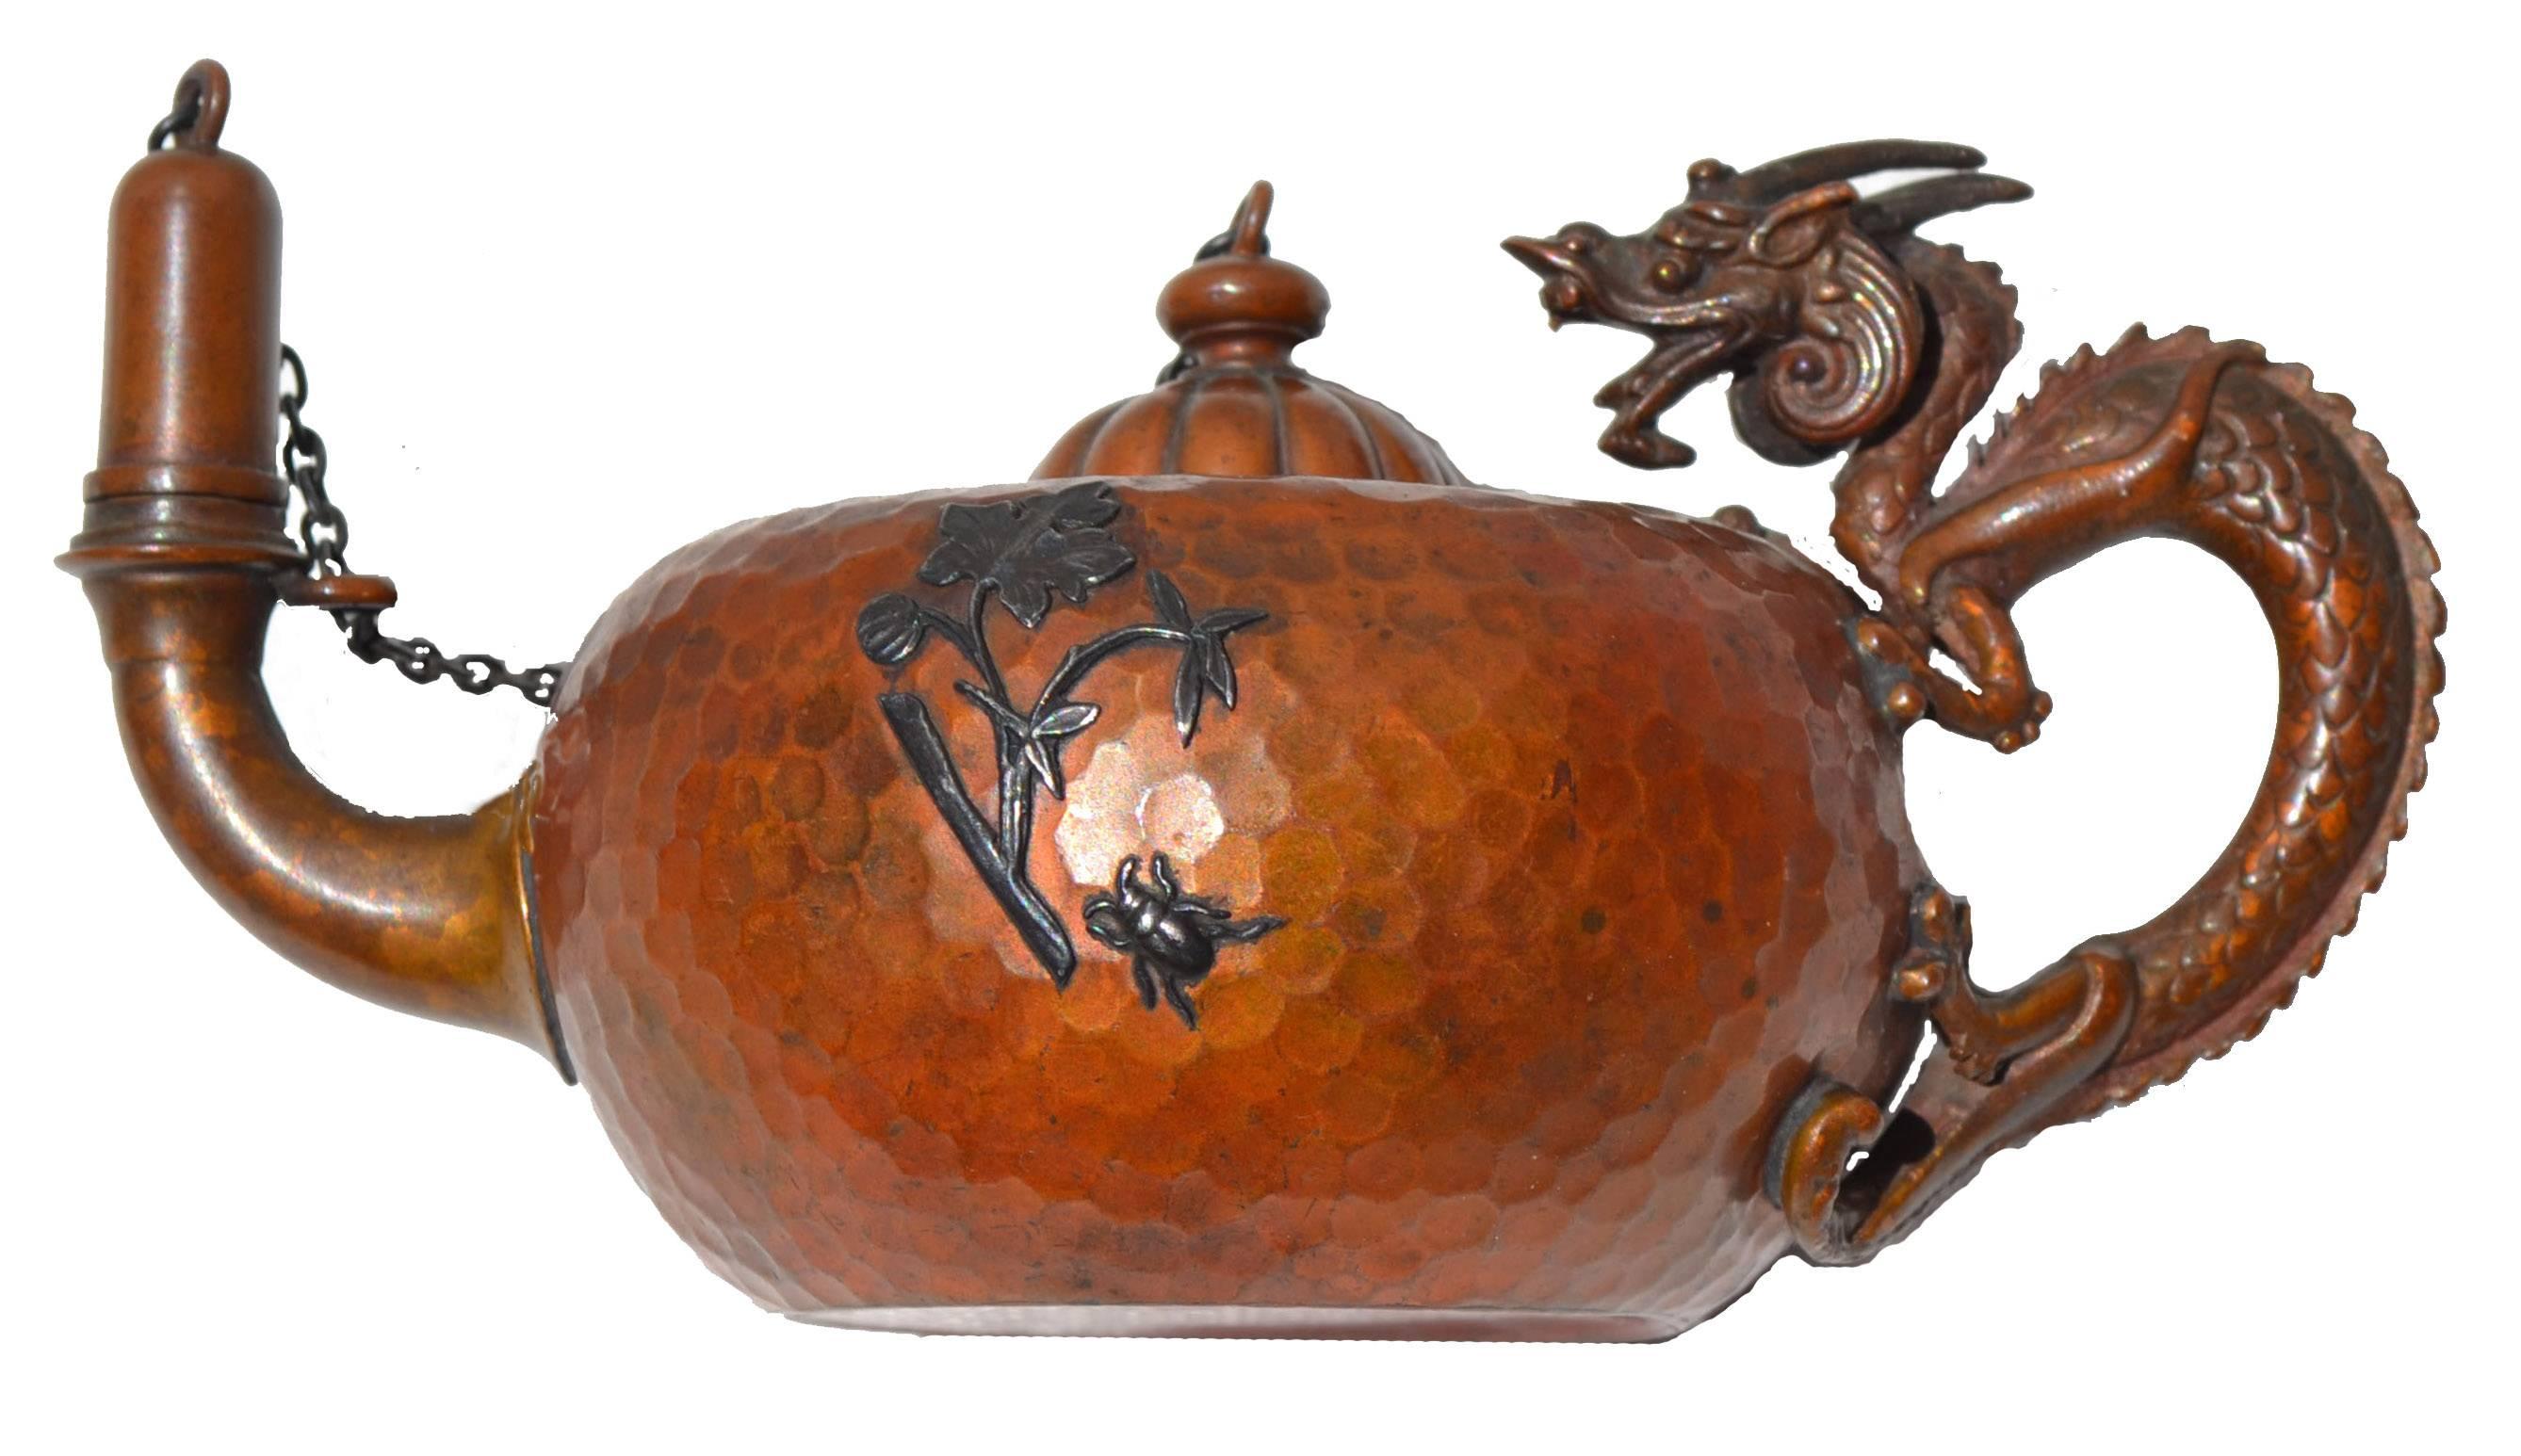 American Aesthetic period, copper, bronze and sterling silver handmade and hammered cigar lamp by Gorham Silversmiths, date marked for 1882. This nicely detailed Bronze dragon handle lamp has an applied sterling silver Butterfly and a Bee with